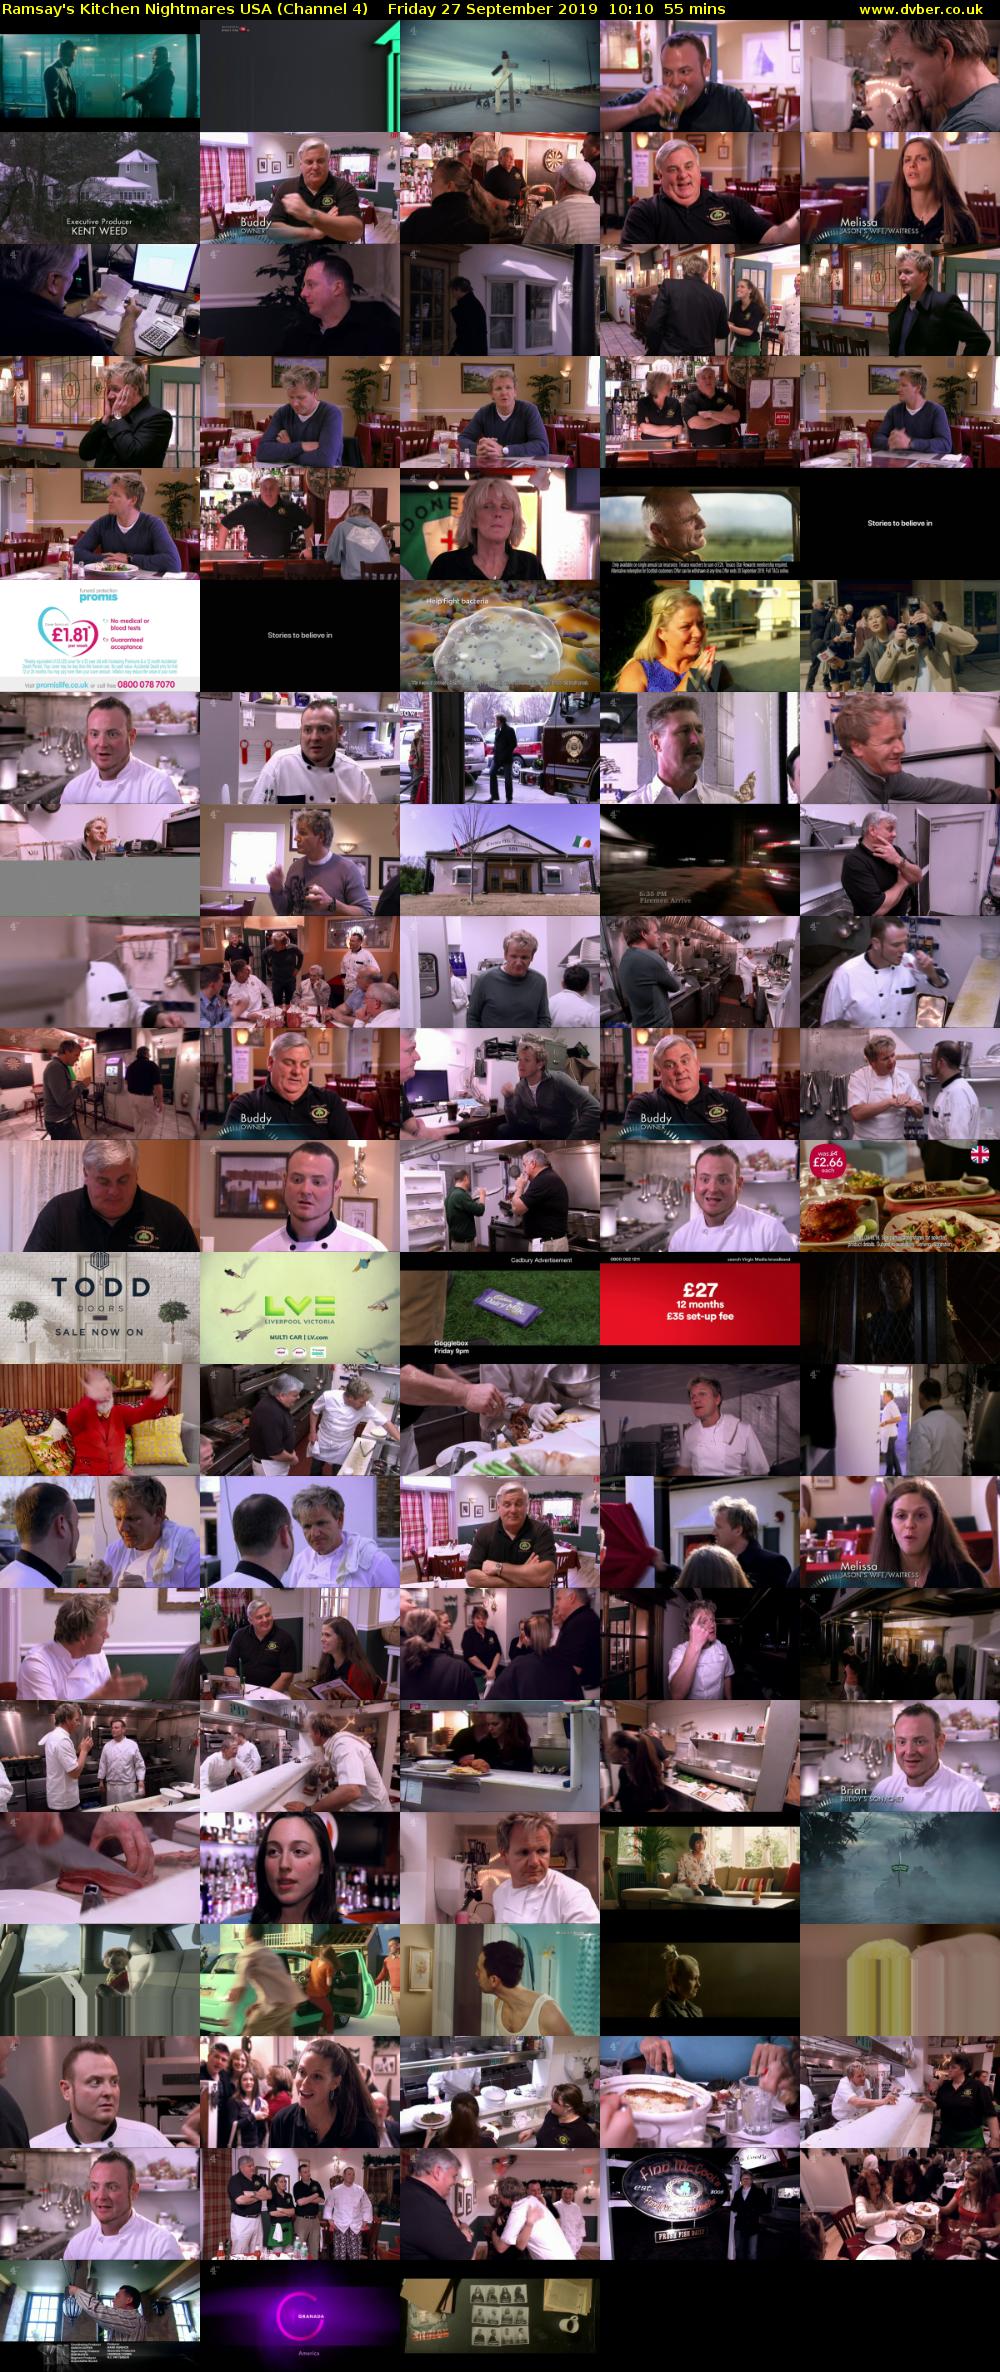 Ramsay's Kitchen Nightmares USA (Channel 4) Friday 27 September 2019 10:10 - 11:05